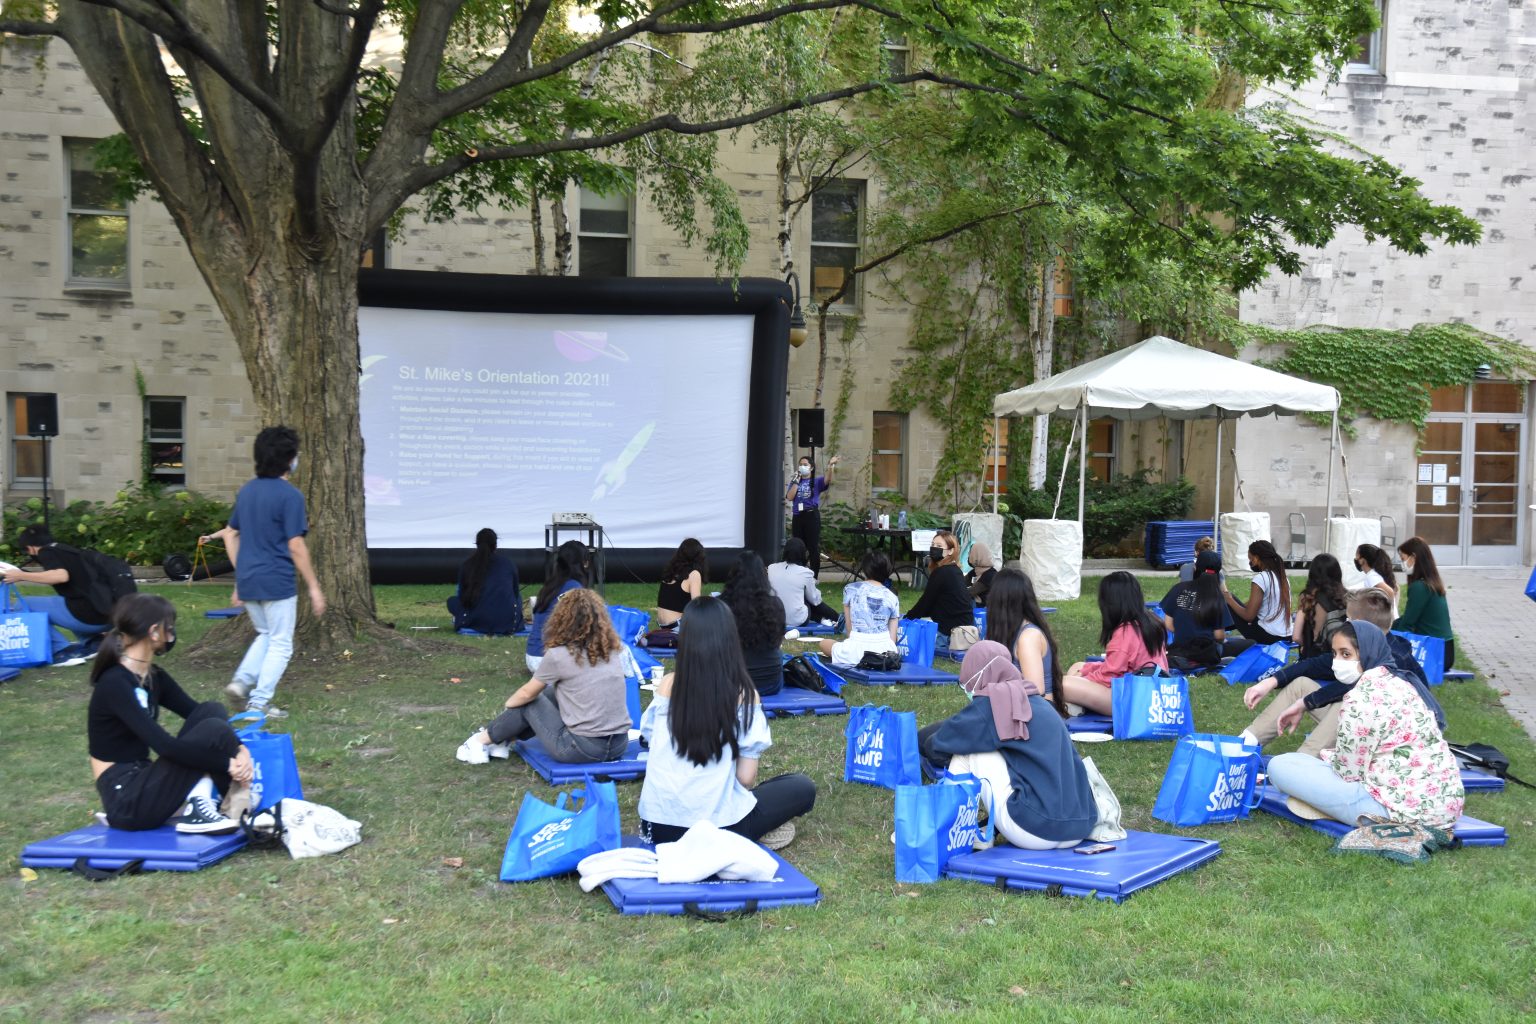 Photograph of a number of Class of 2025 students seated on blue mats on the St. Mike's quad lawn, spaced 6 feet apart, watching a presentation on a large outdoor screen.